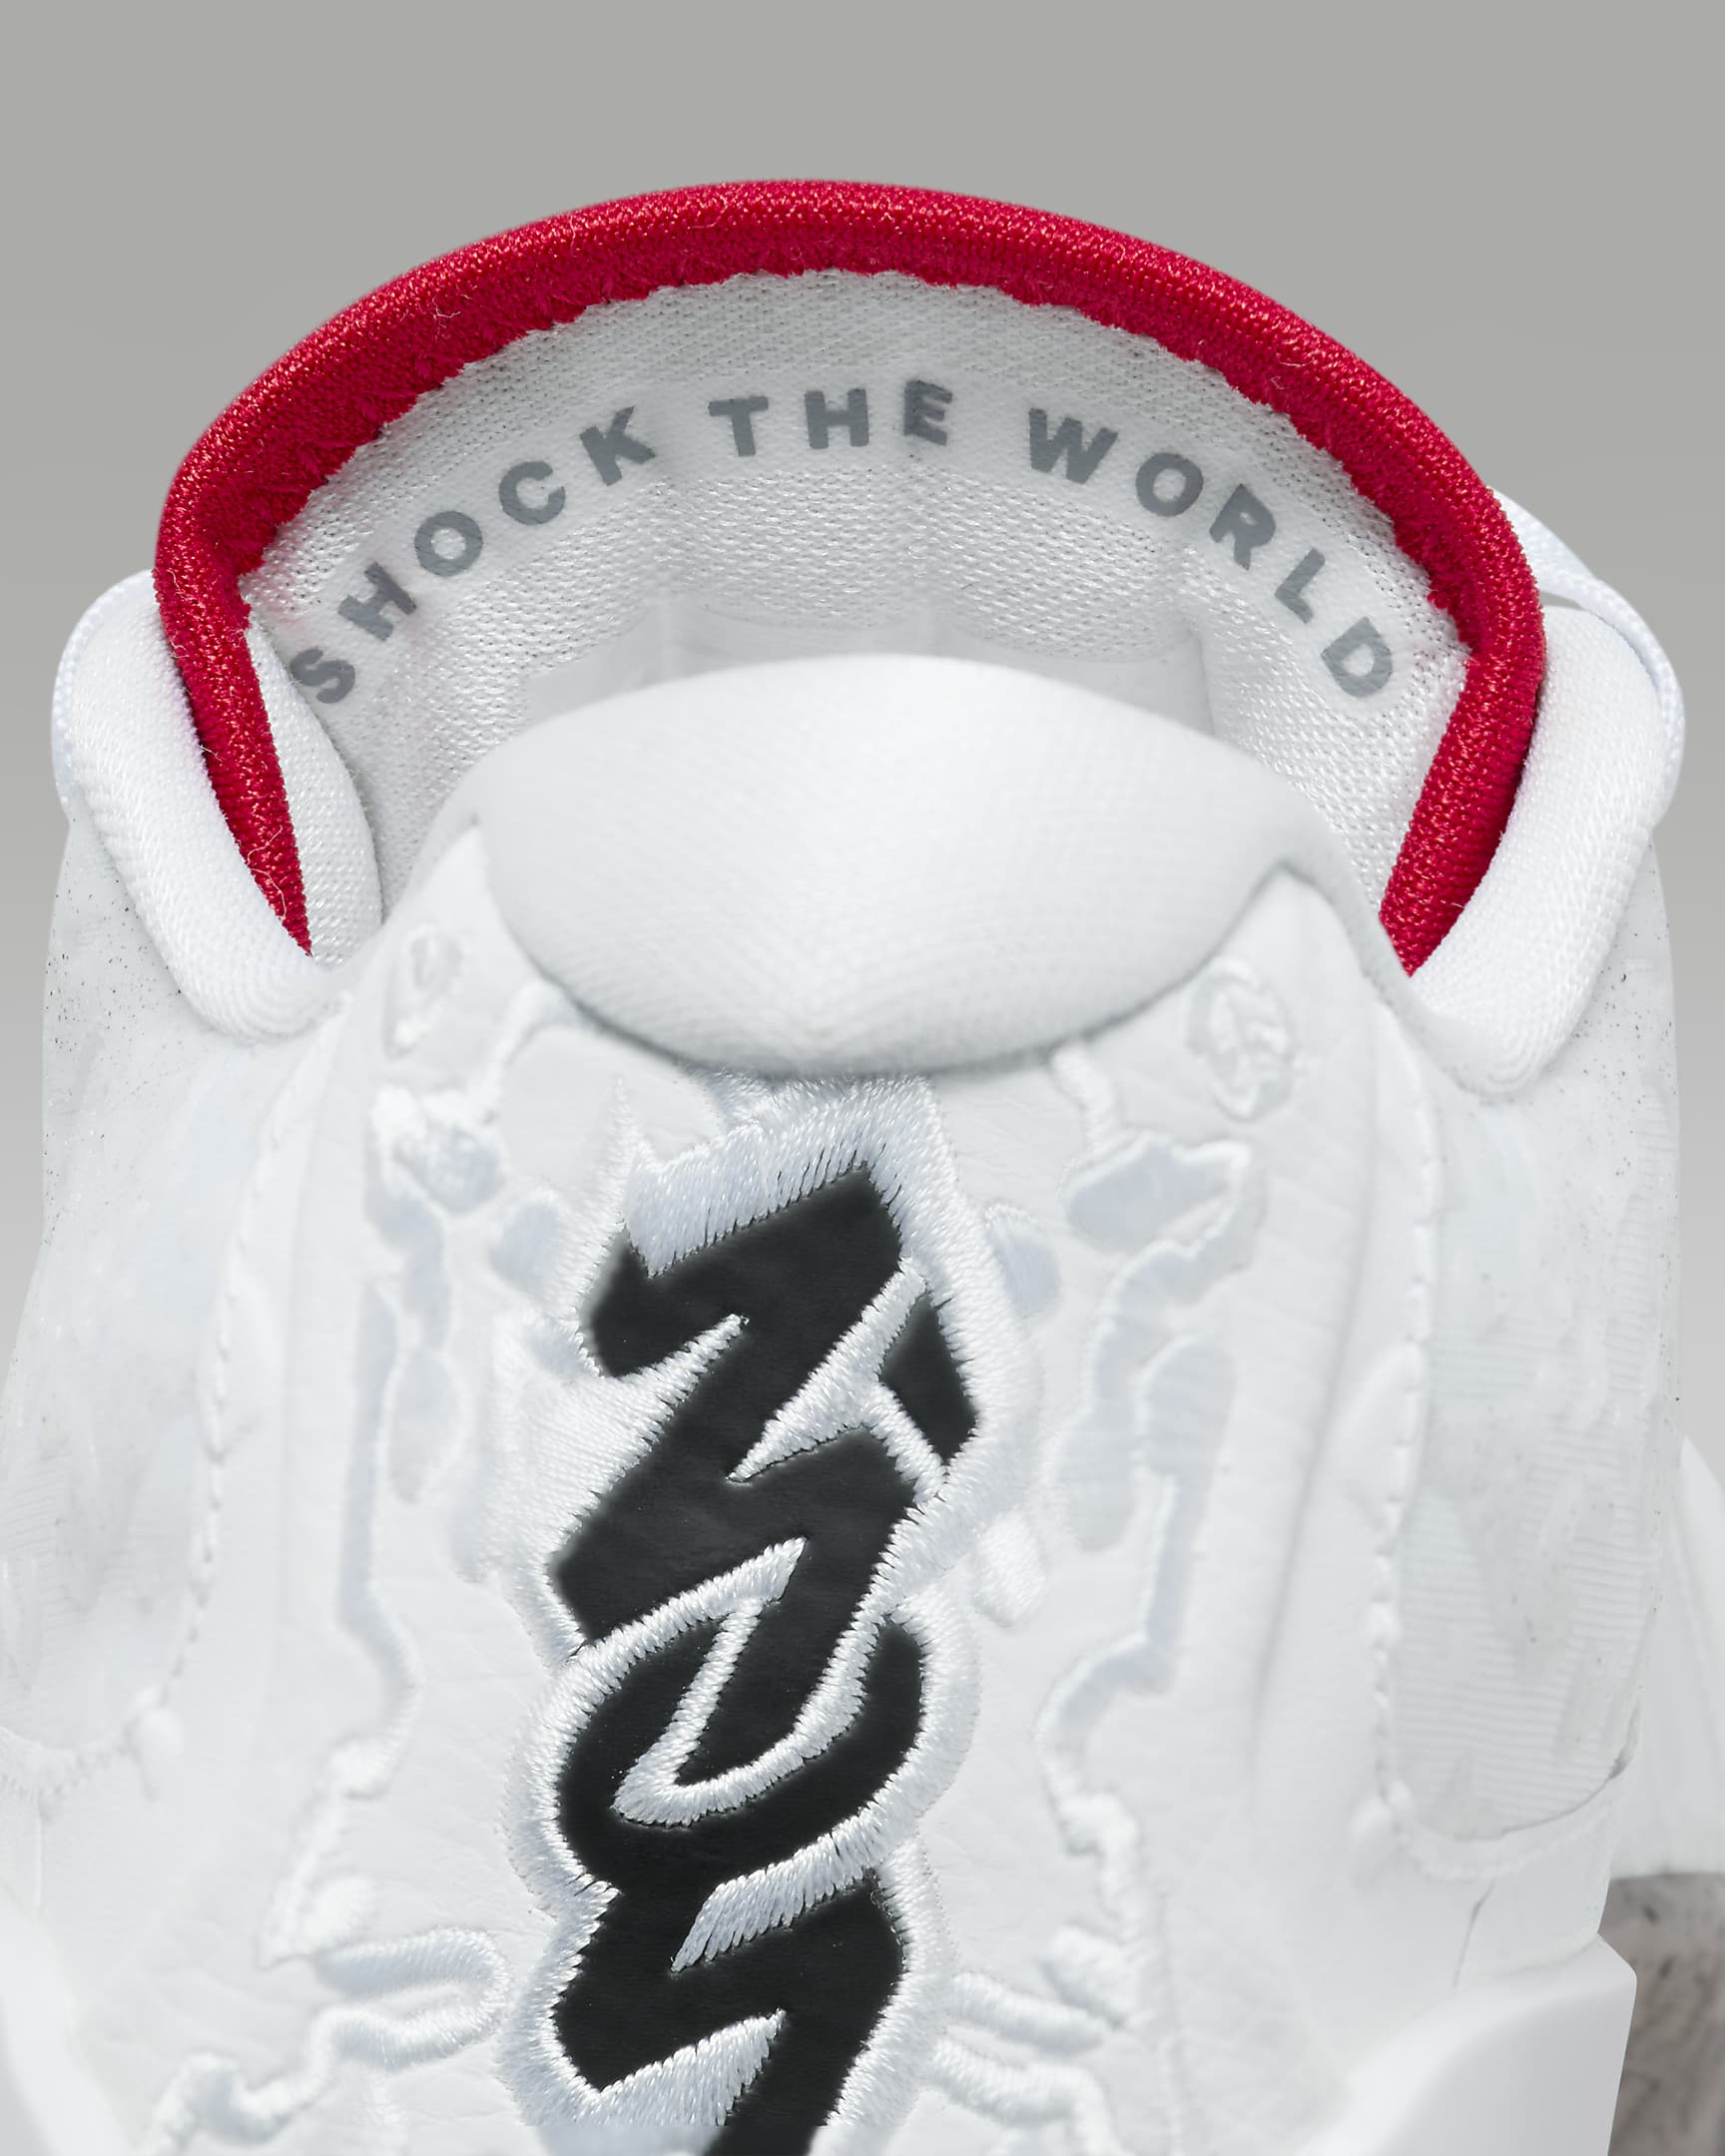 Zion 3 'Fresh Paint' Older Kids' Basketball Shoes - White/Cement Grey/Pure Platinum/University Red